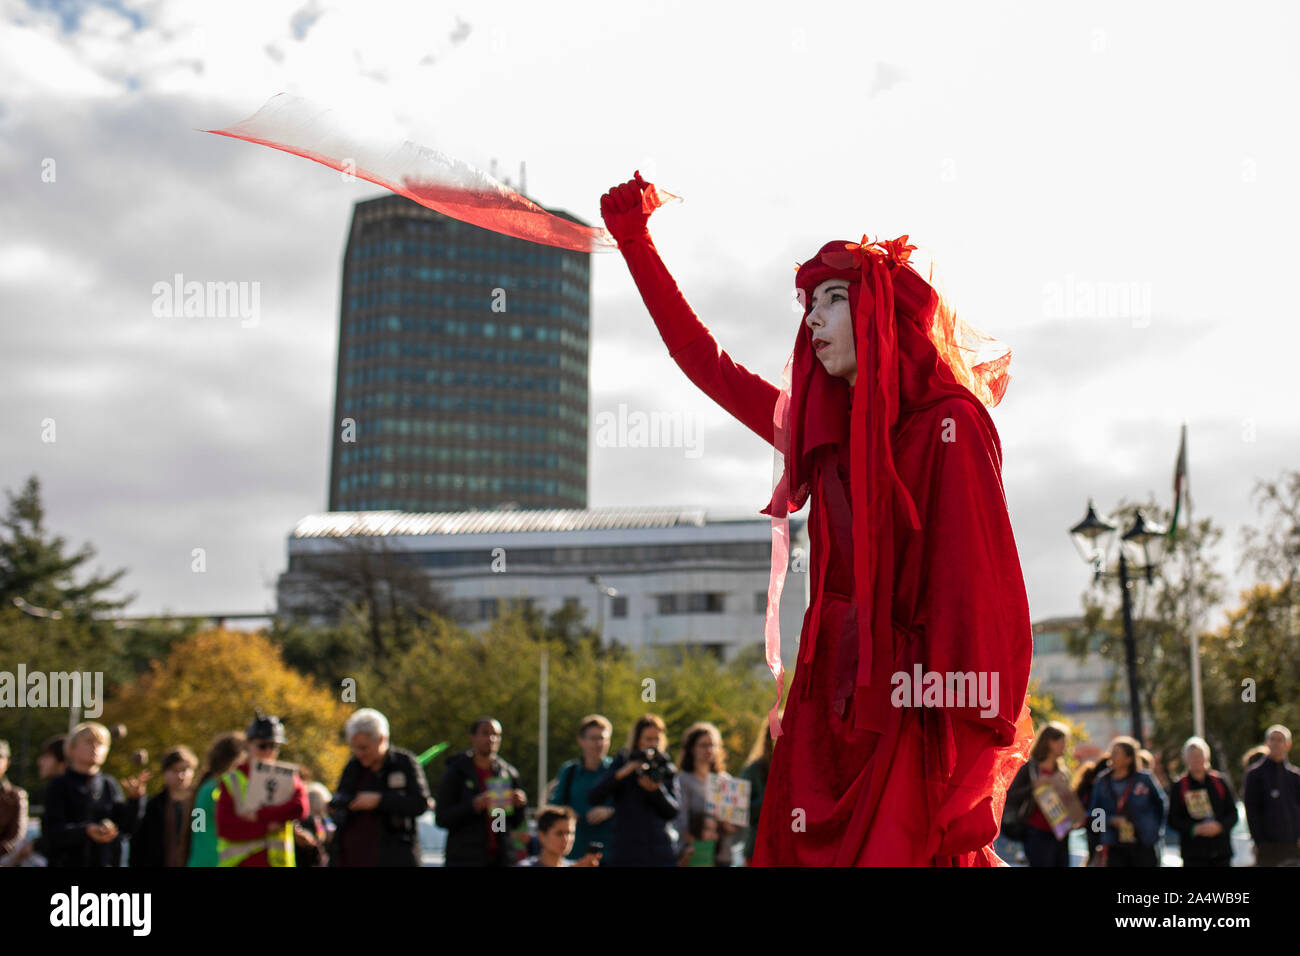 Cardiff, Wales, UK, October 16th 2019. The Red Rebels of global environmental movement Extinction Rebellion outside Cardiff City Hall, where the Low Carbon Wales conference is being held. Police have banned Extinction Rebellion protests from continuing anywhere in London. Credit: Mark Hawkins/Alamy Live News Stock Photo